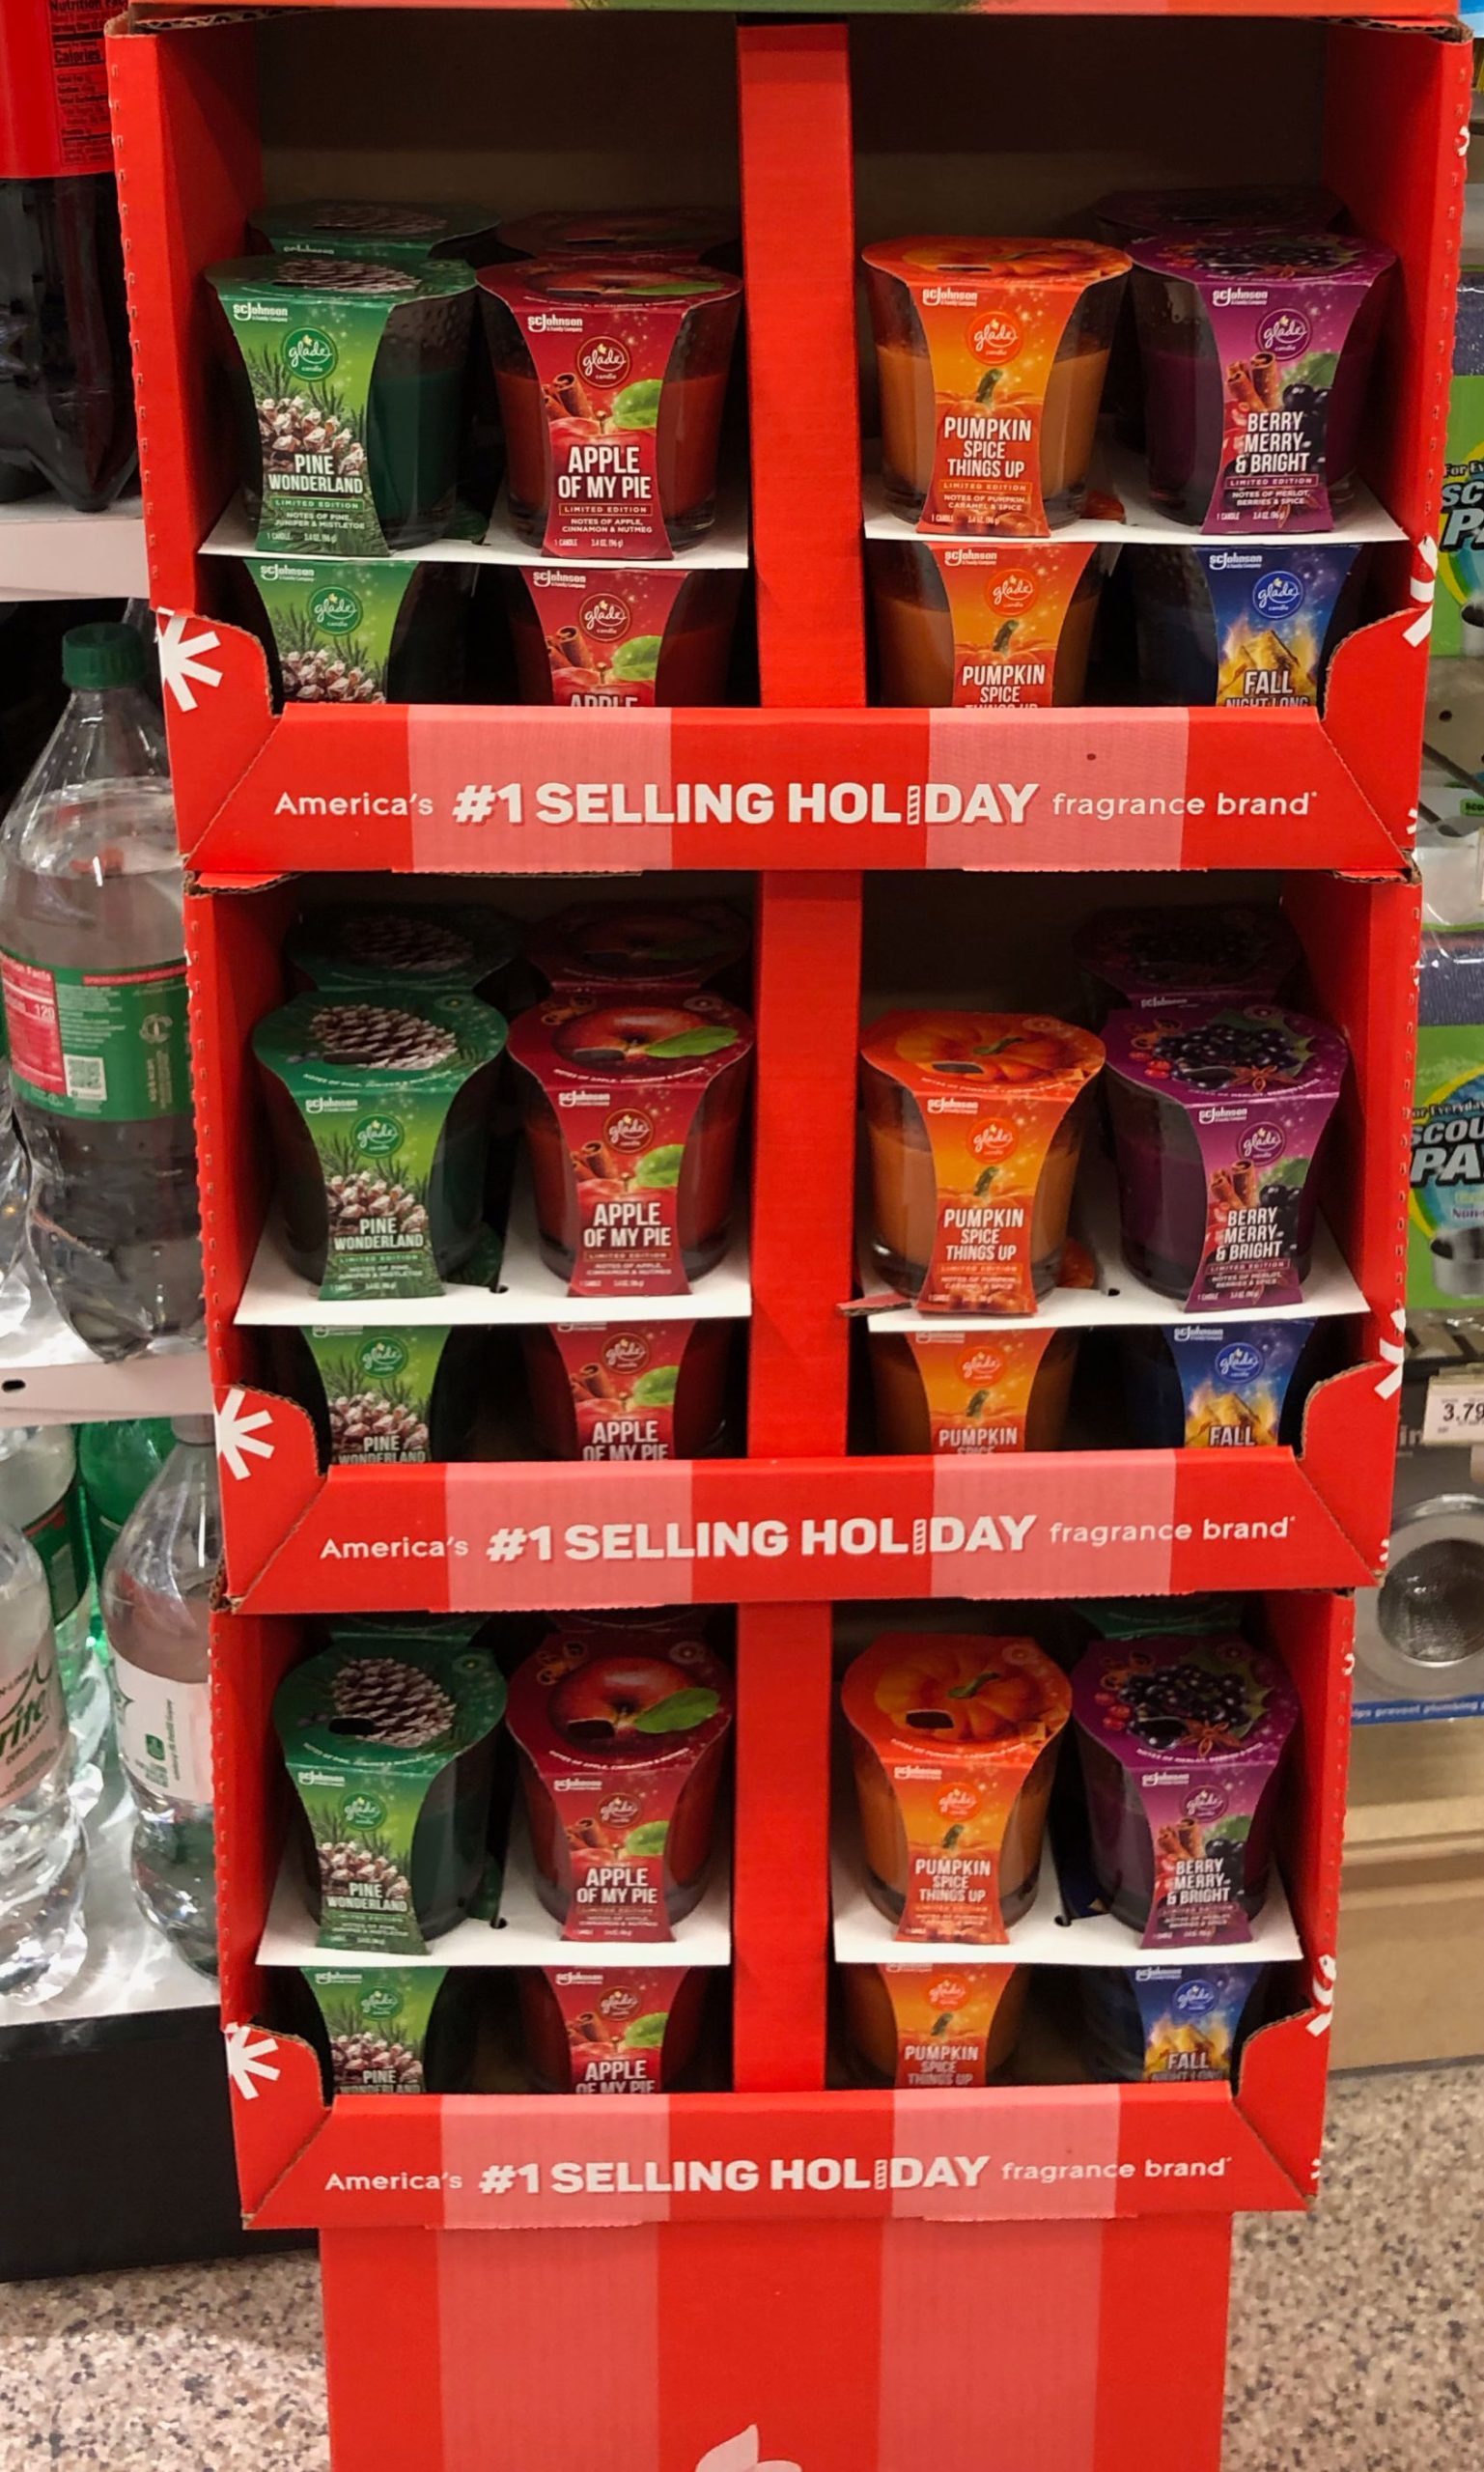 Be On The Look Out For The Glade® Holiday Limited Edition Scents For 2020 on I Heart Publix 1